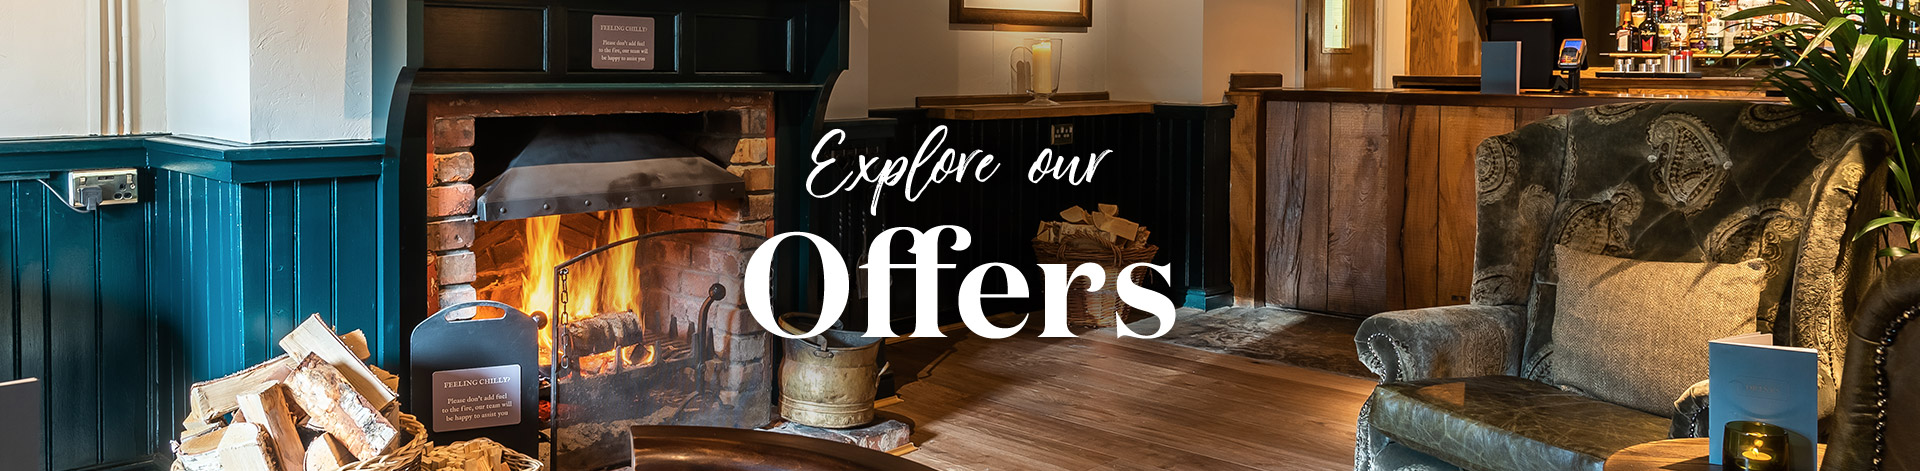 Our latest offers at The Golden Ball Inn